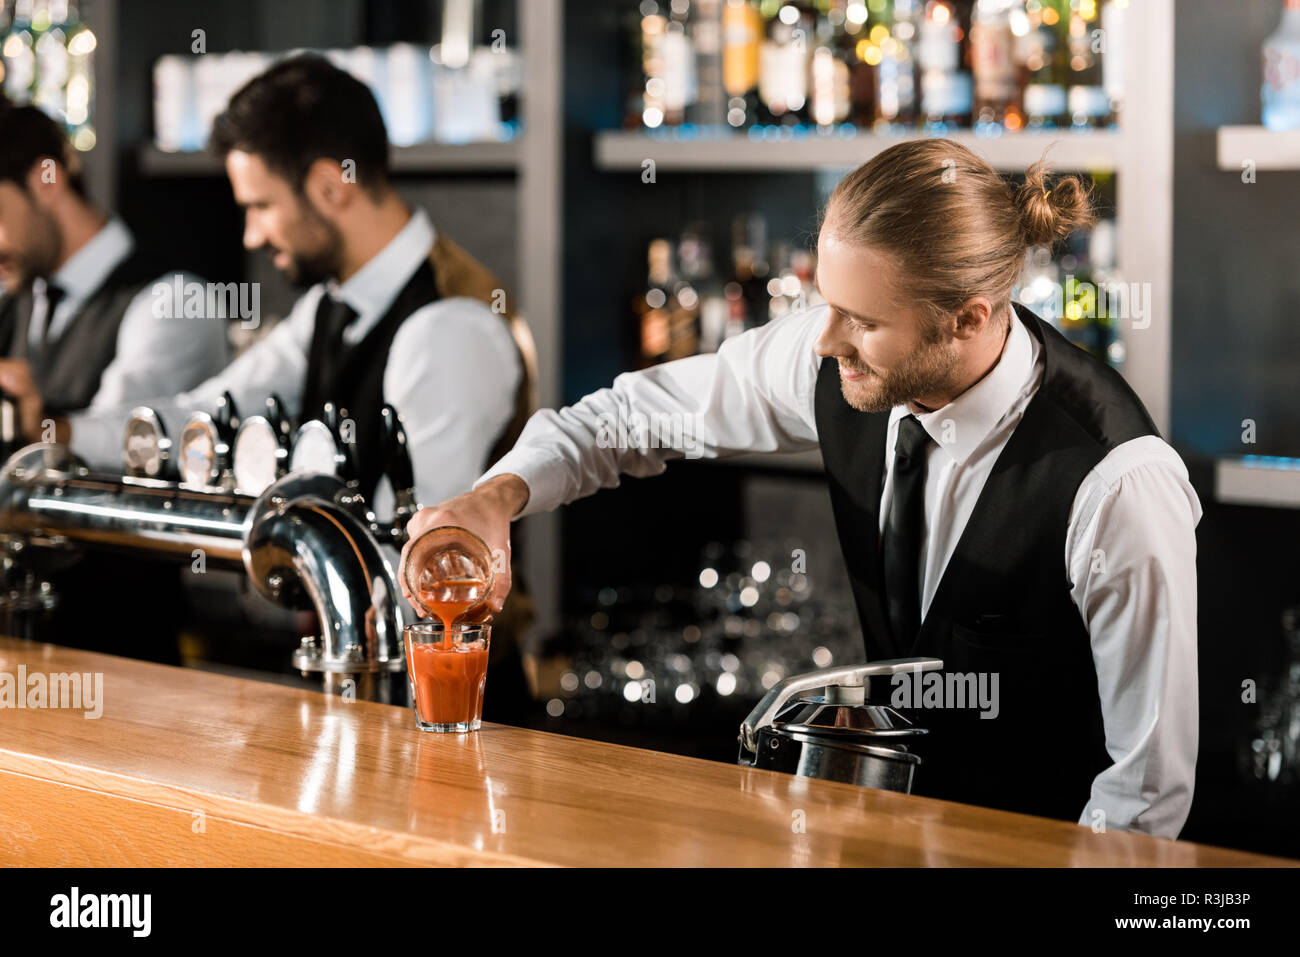 Barman pouring drink in glass on wooden counter Stock Photo